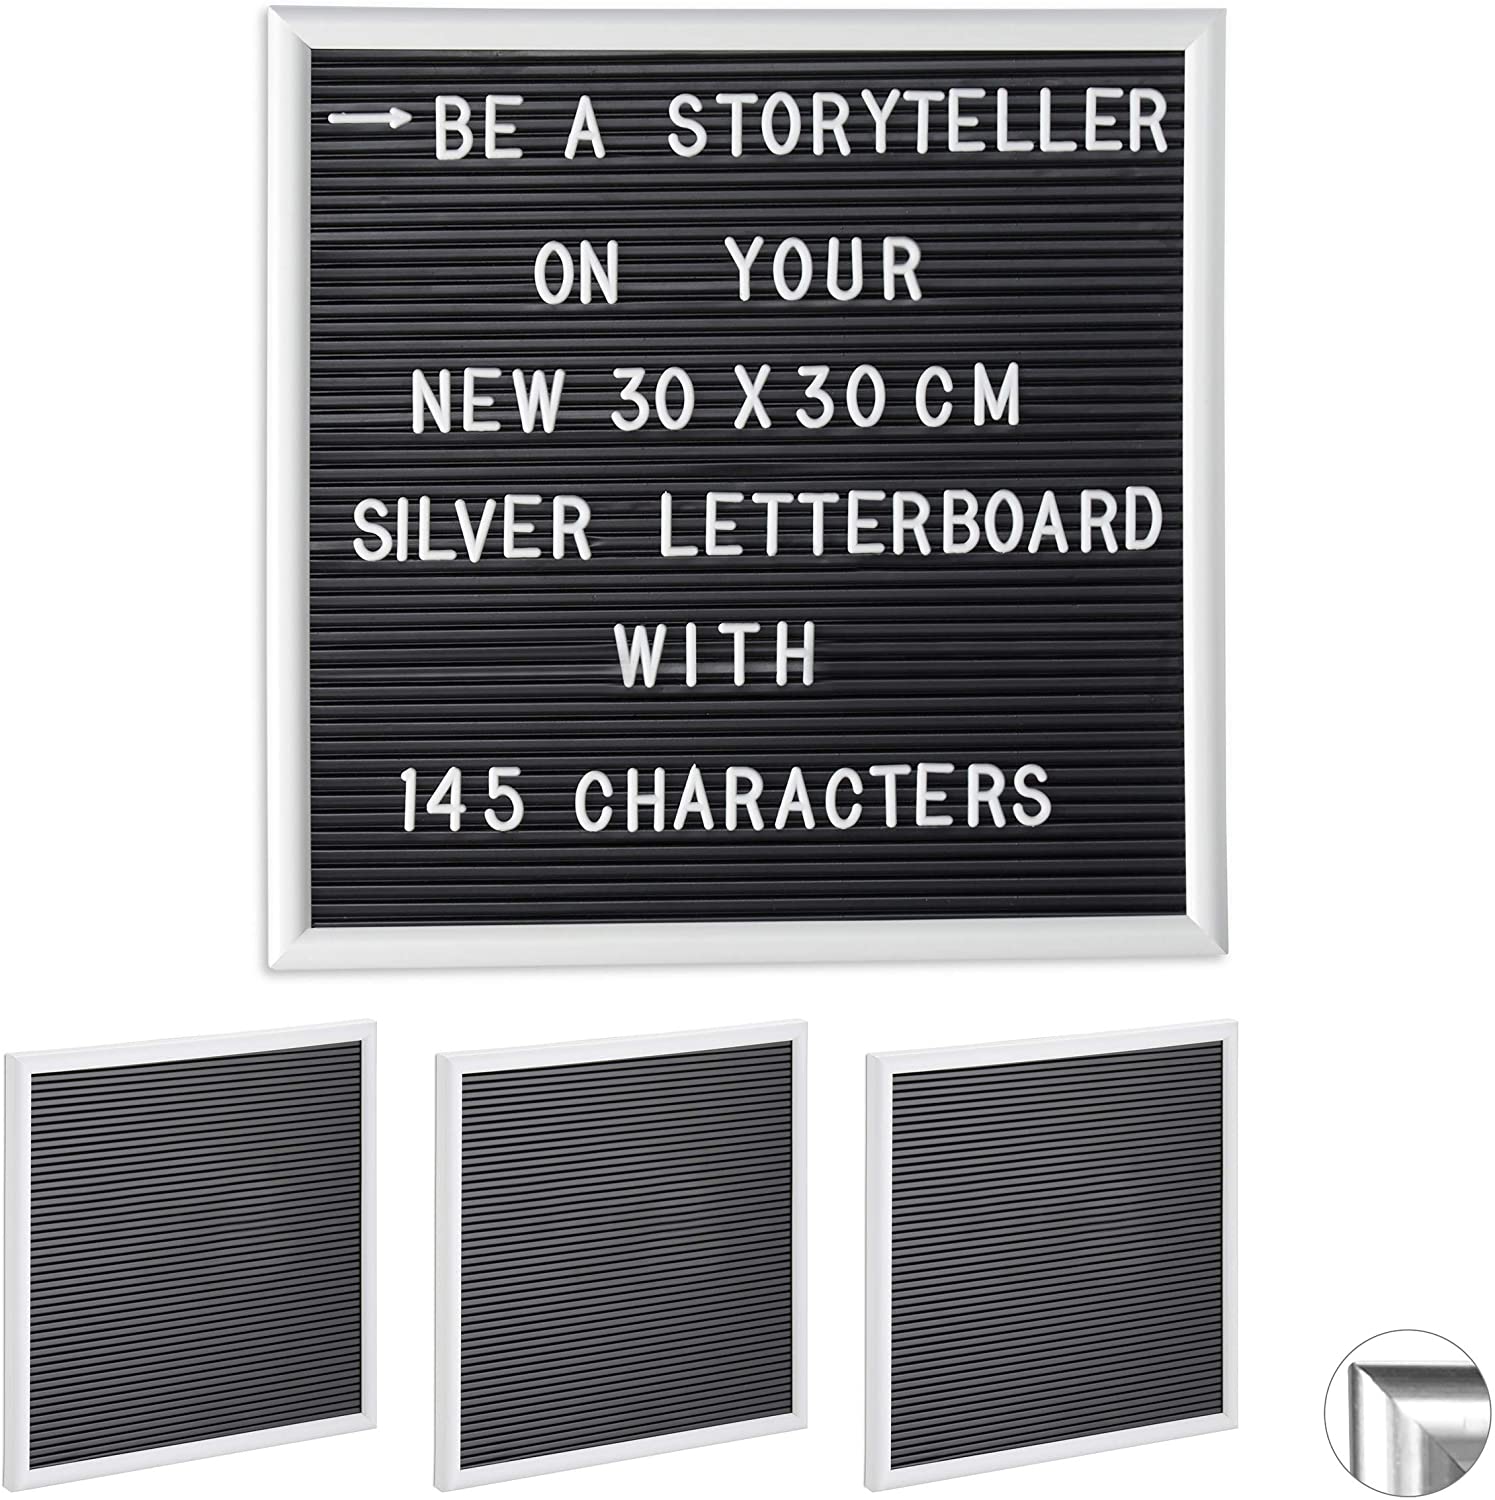 4 x Letterboard with Wooden Frame, 145 Letters, Numbers and Special Characters, Slotted Board 30 x 30 cm, White